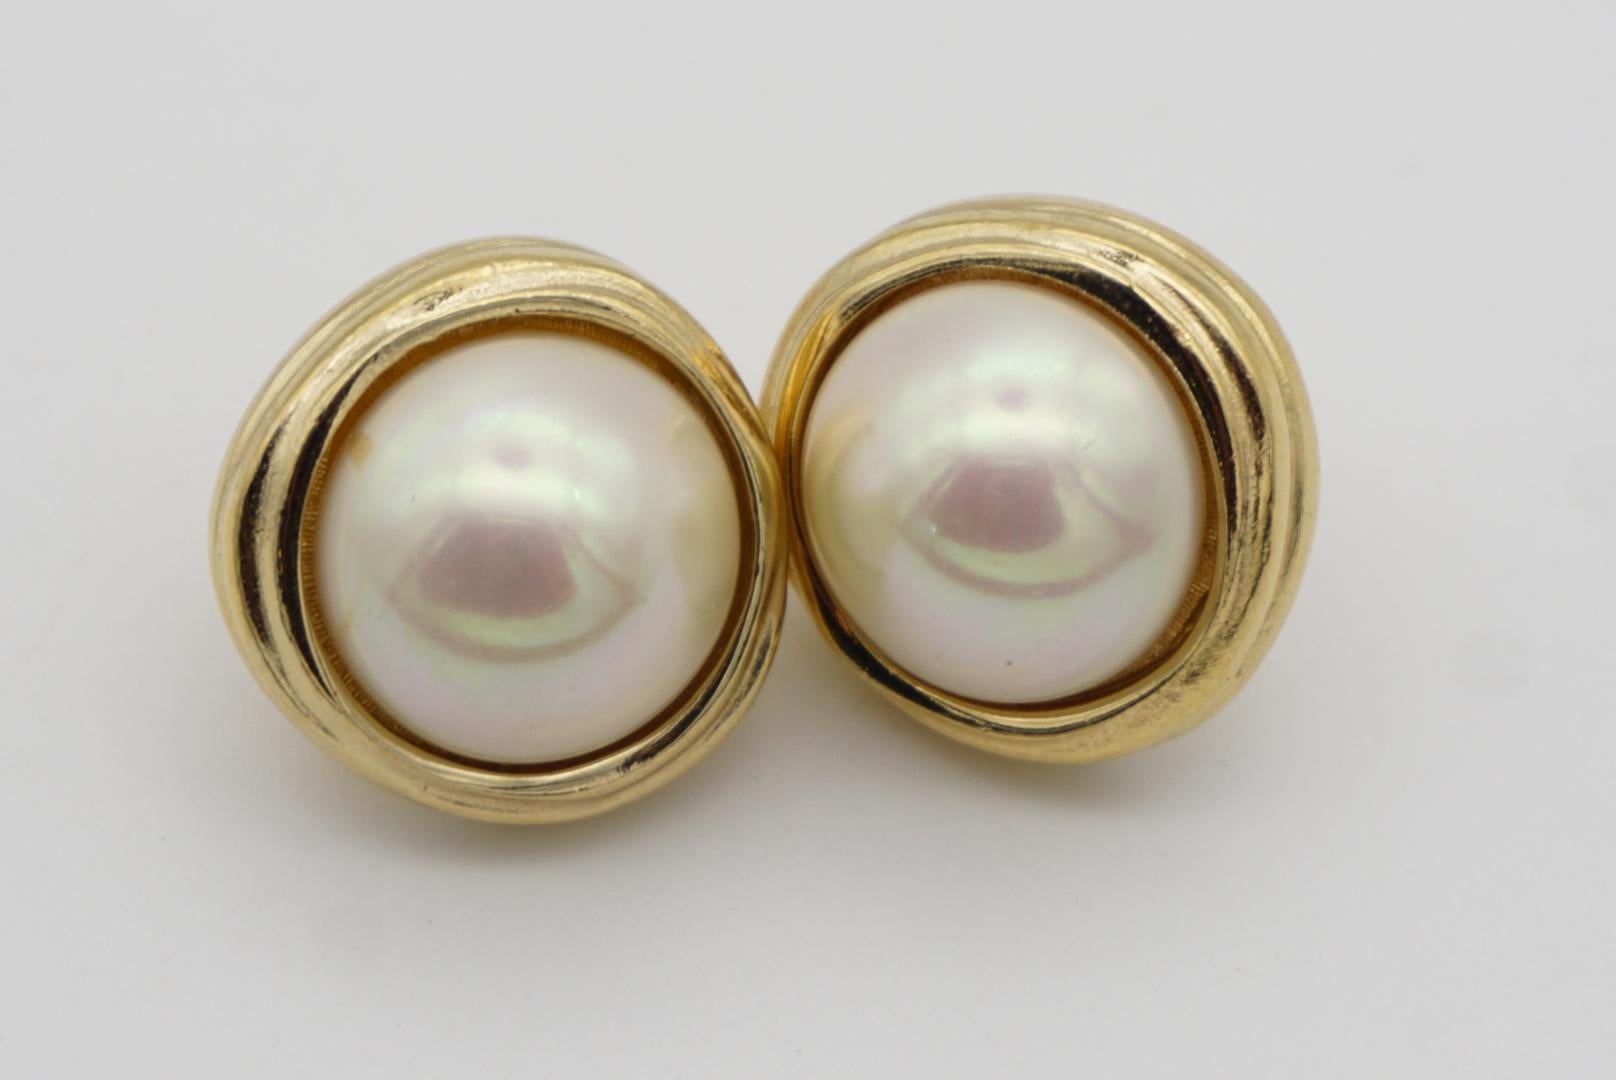 Christian Dior Vintage 1980s Irregular Large Round Faux Pearl Pierced Earrings For Sale 1